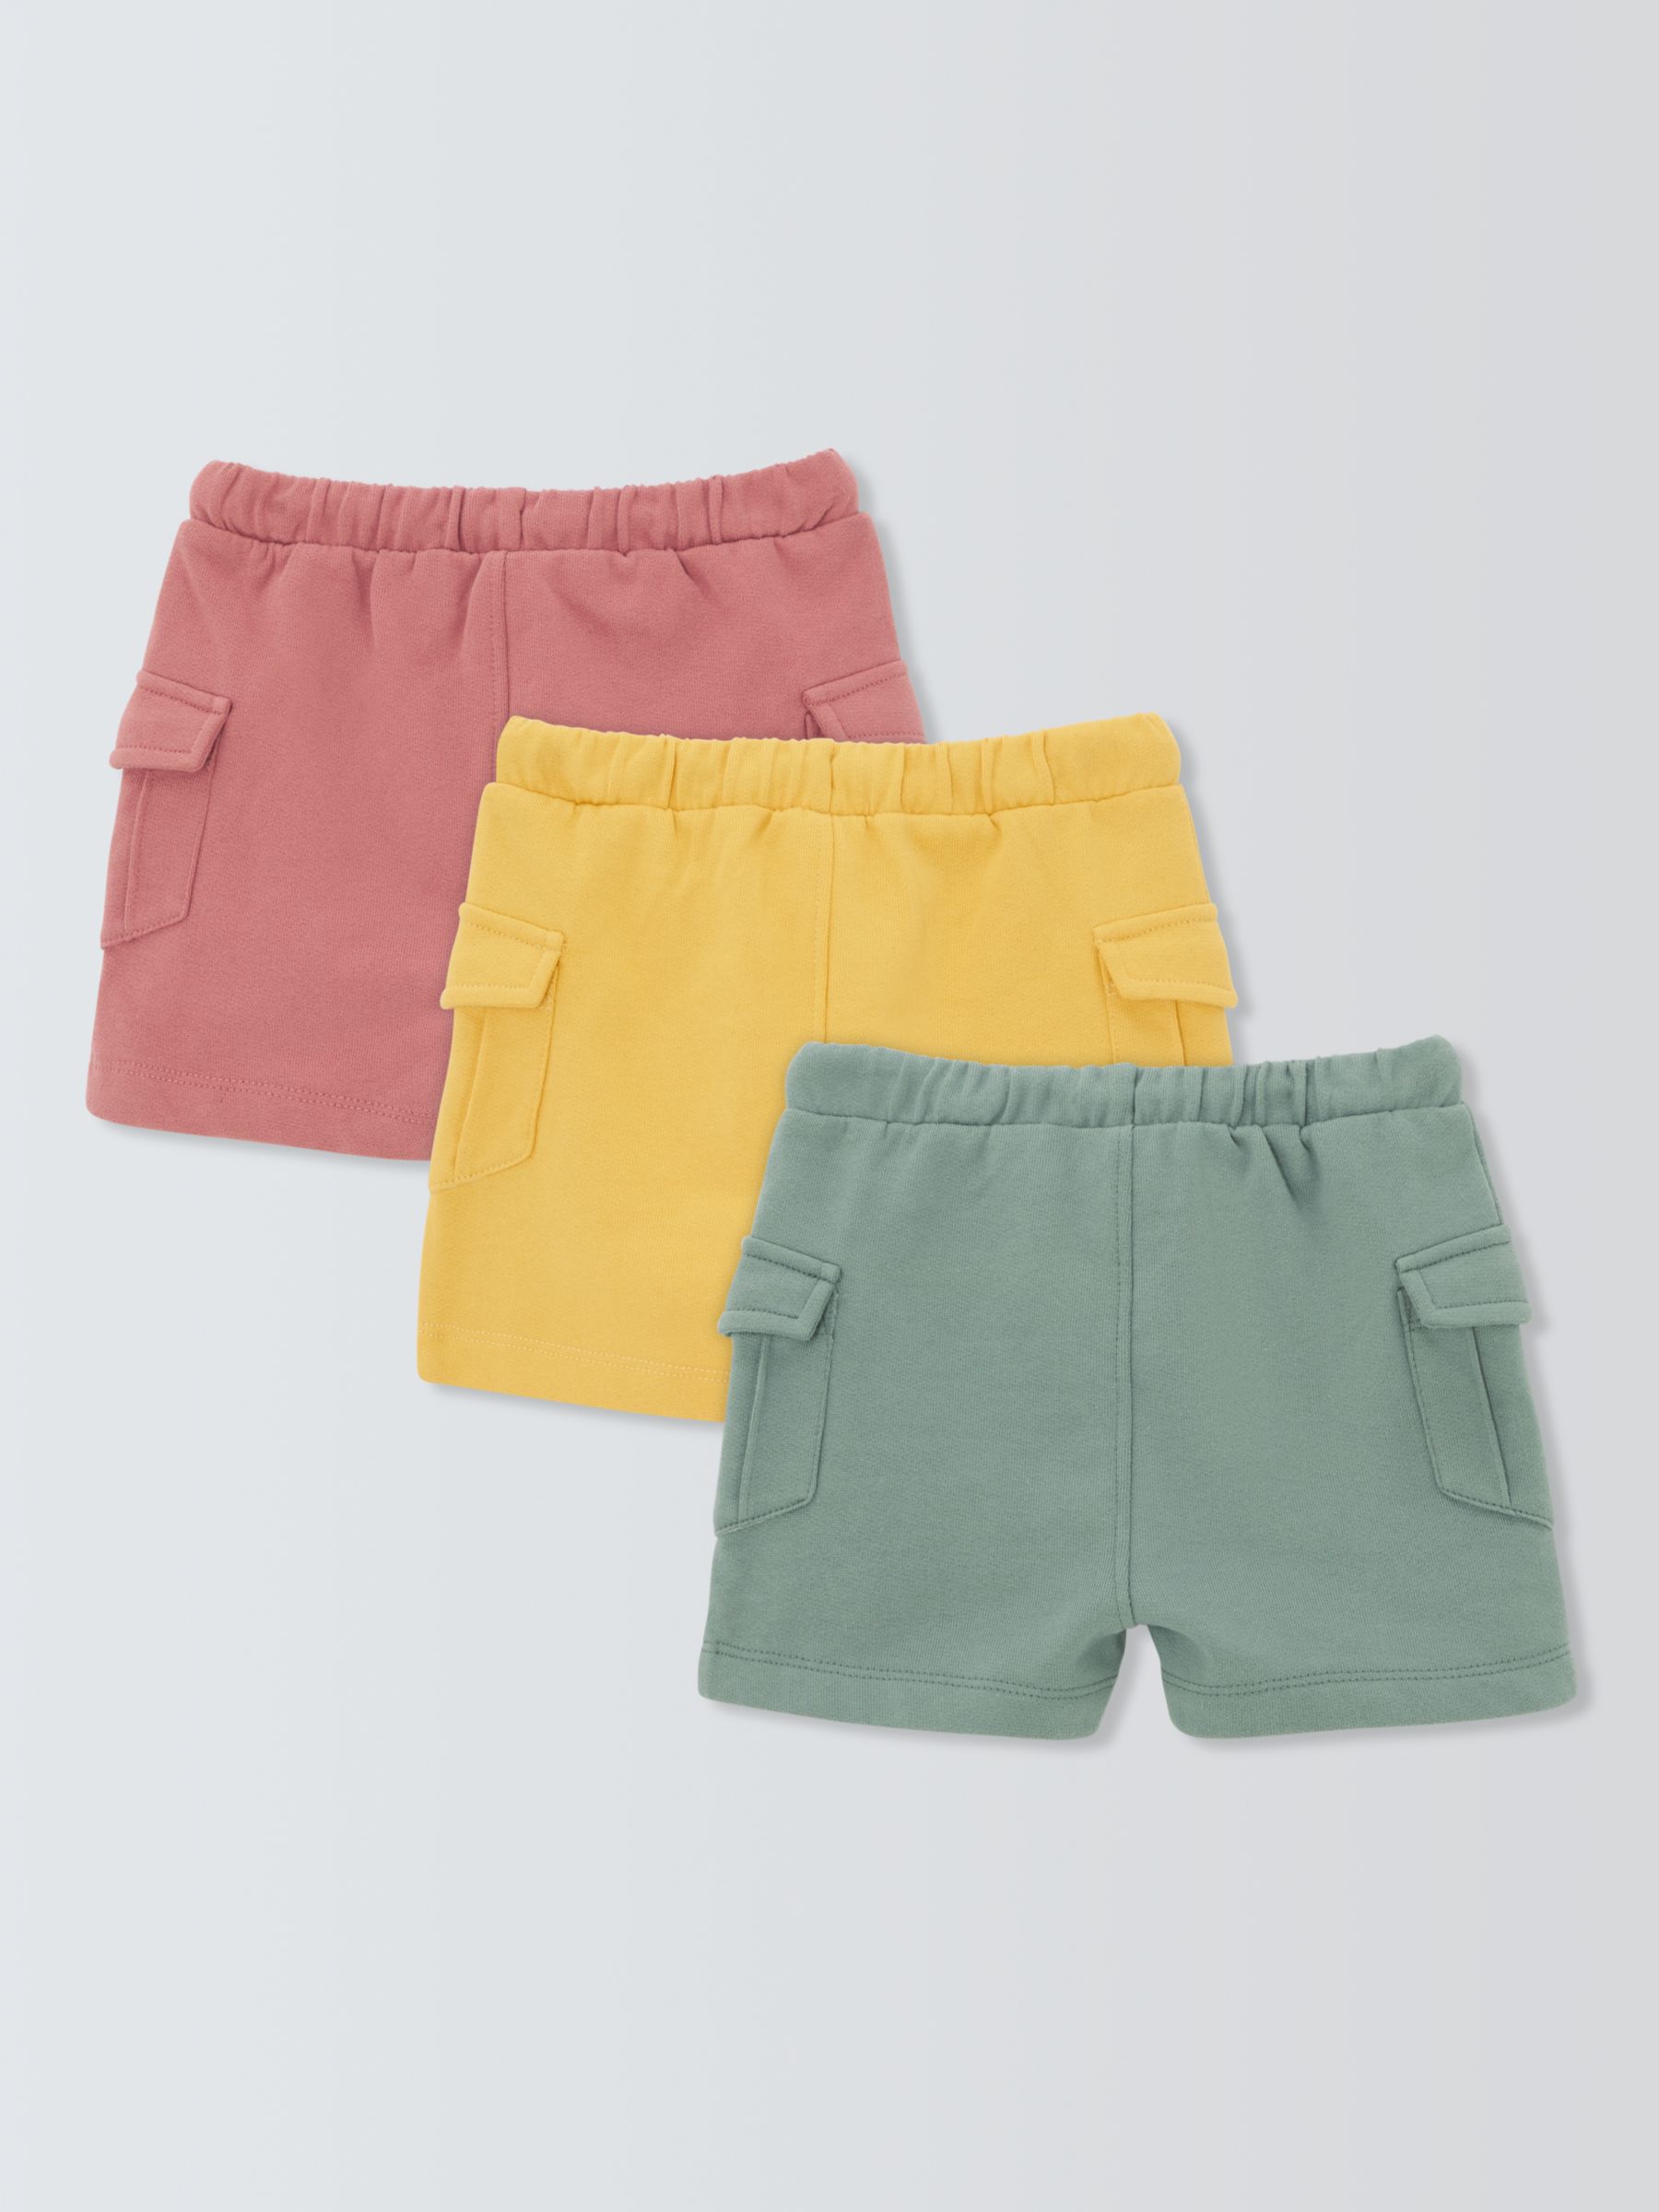 John Lewis Baby Cotton Shorts, Pack of 3, Multi, 6-9 months